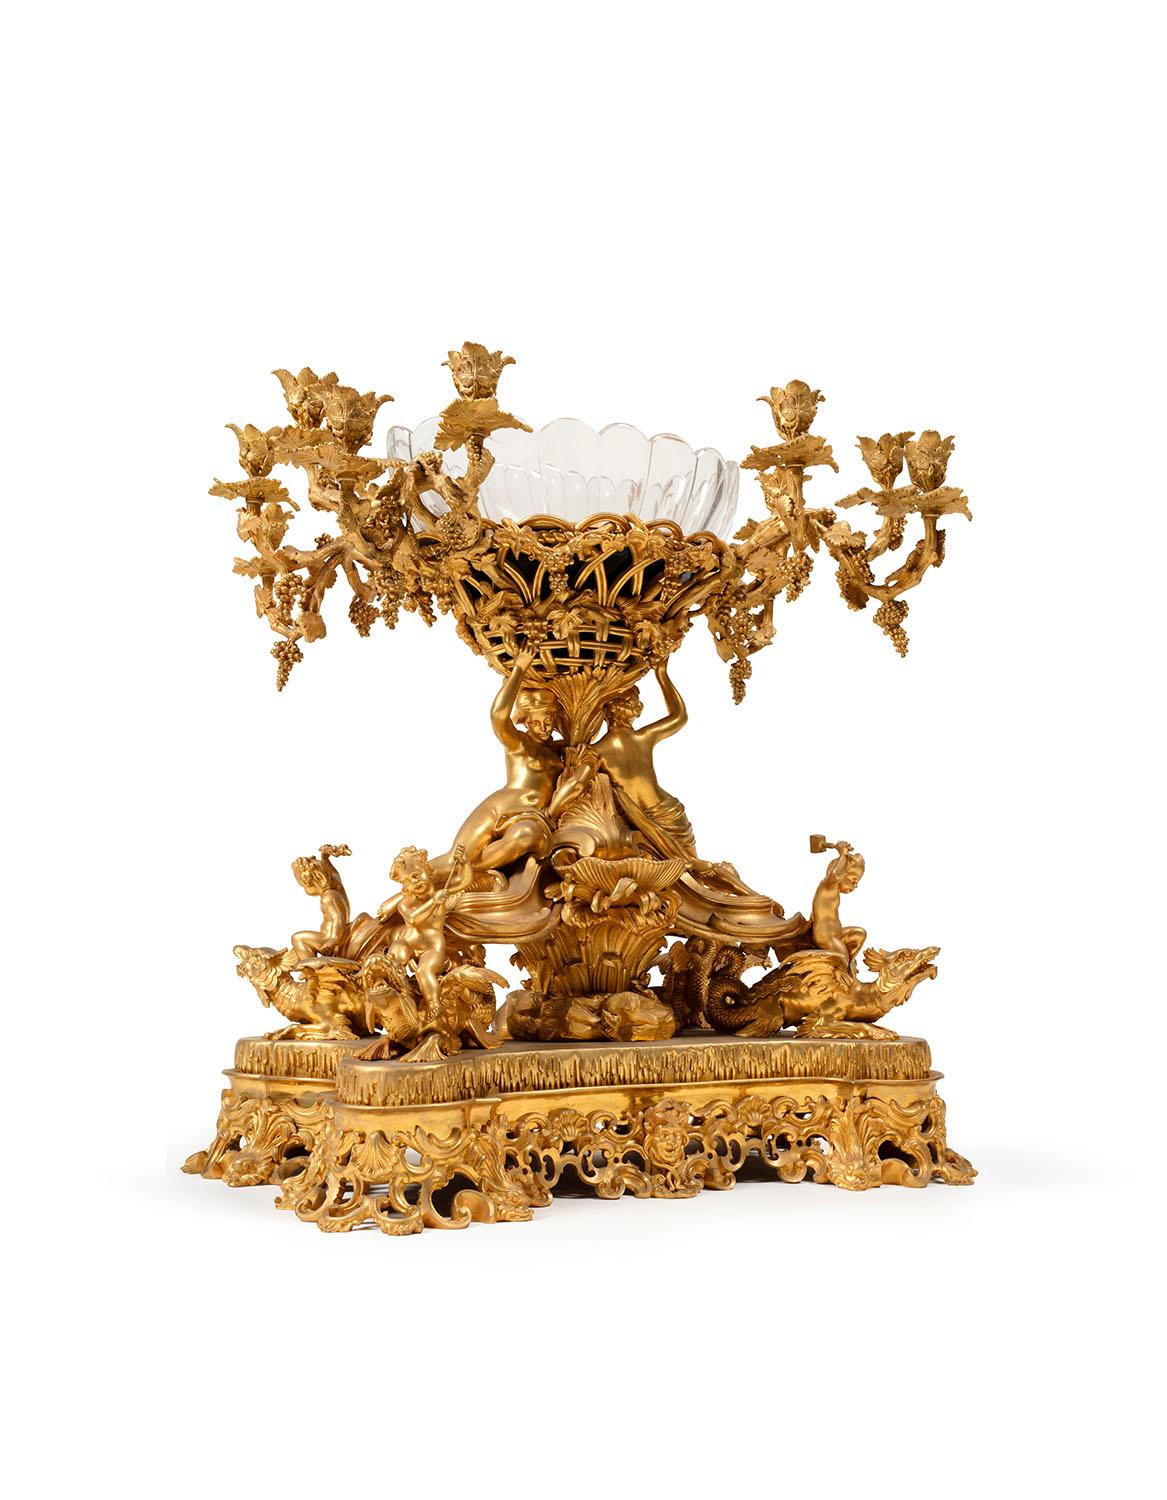 Surtout de table  gilt bronze louis XVI style after the work of GOUTHIERE
This high end work is a master piece of a parisian bronzier of his time , probably by one of the best name of this time The finesse of execution is remarkable,the rarity of